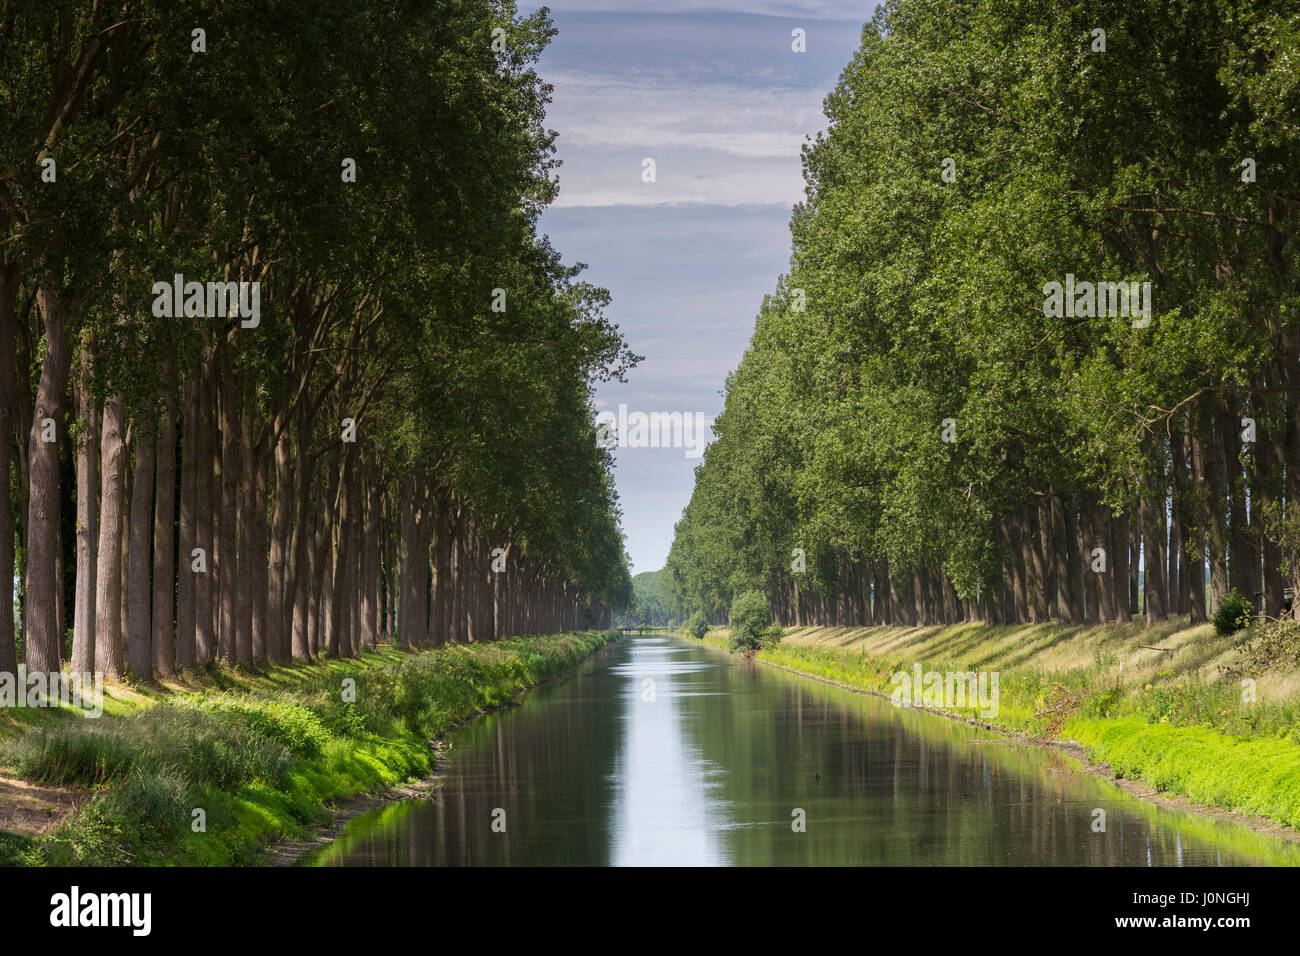 Picturesque avenue of tall trees and Damse Vaart Canal at Damme, province of West Flanders in Belgium Stock Photo